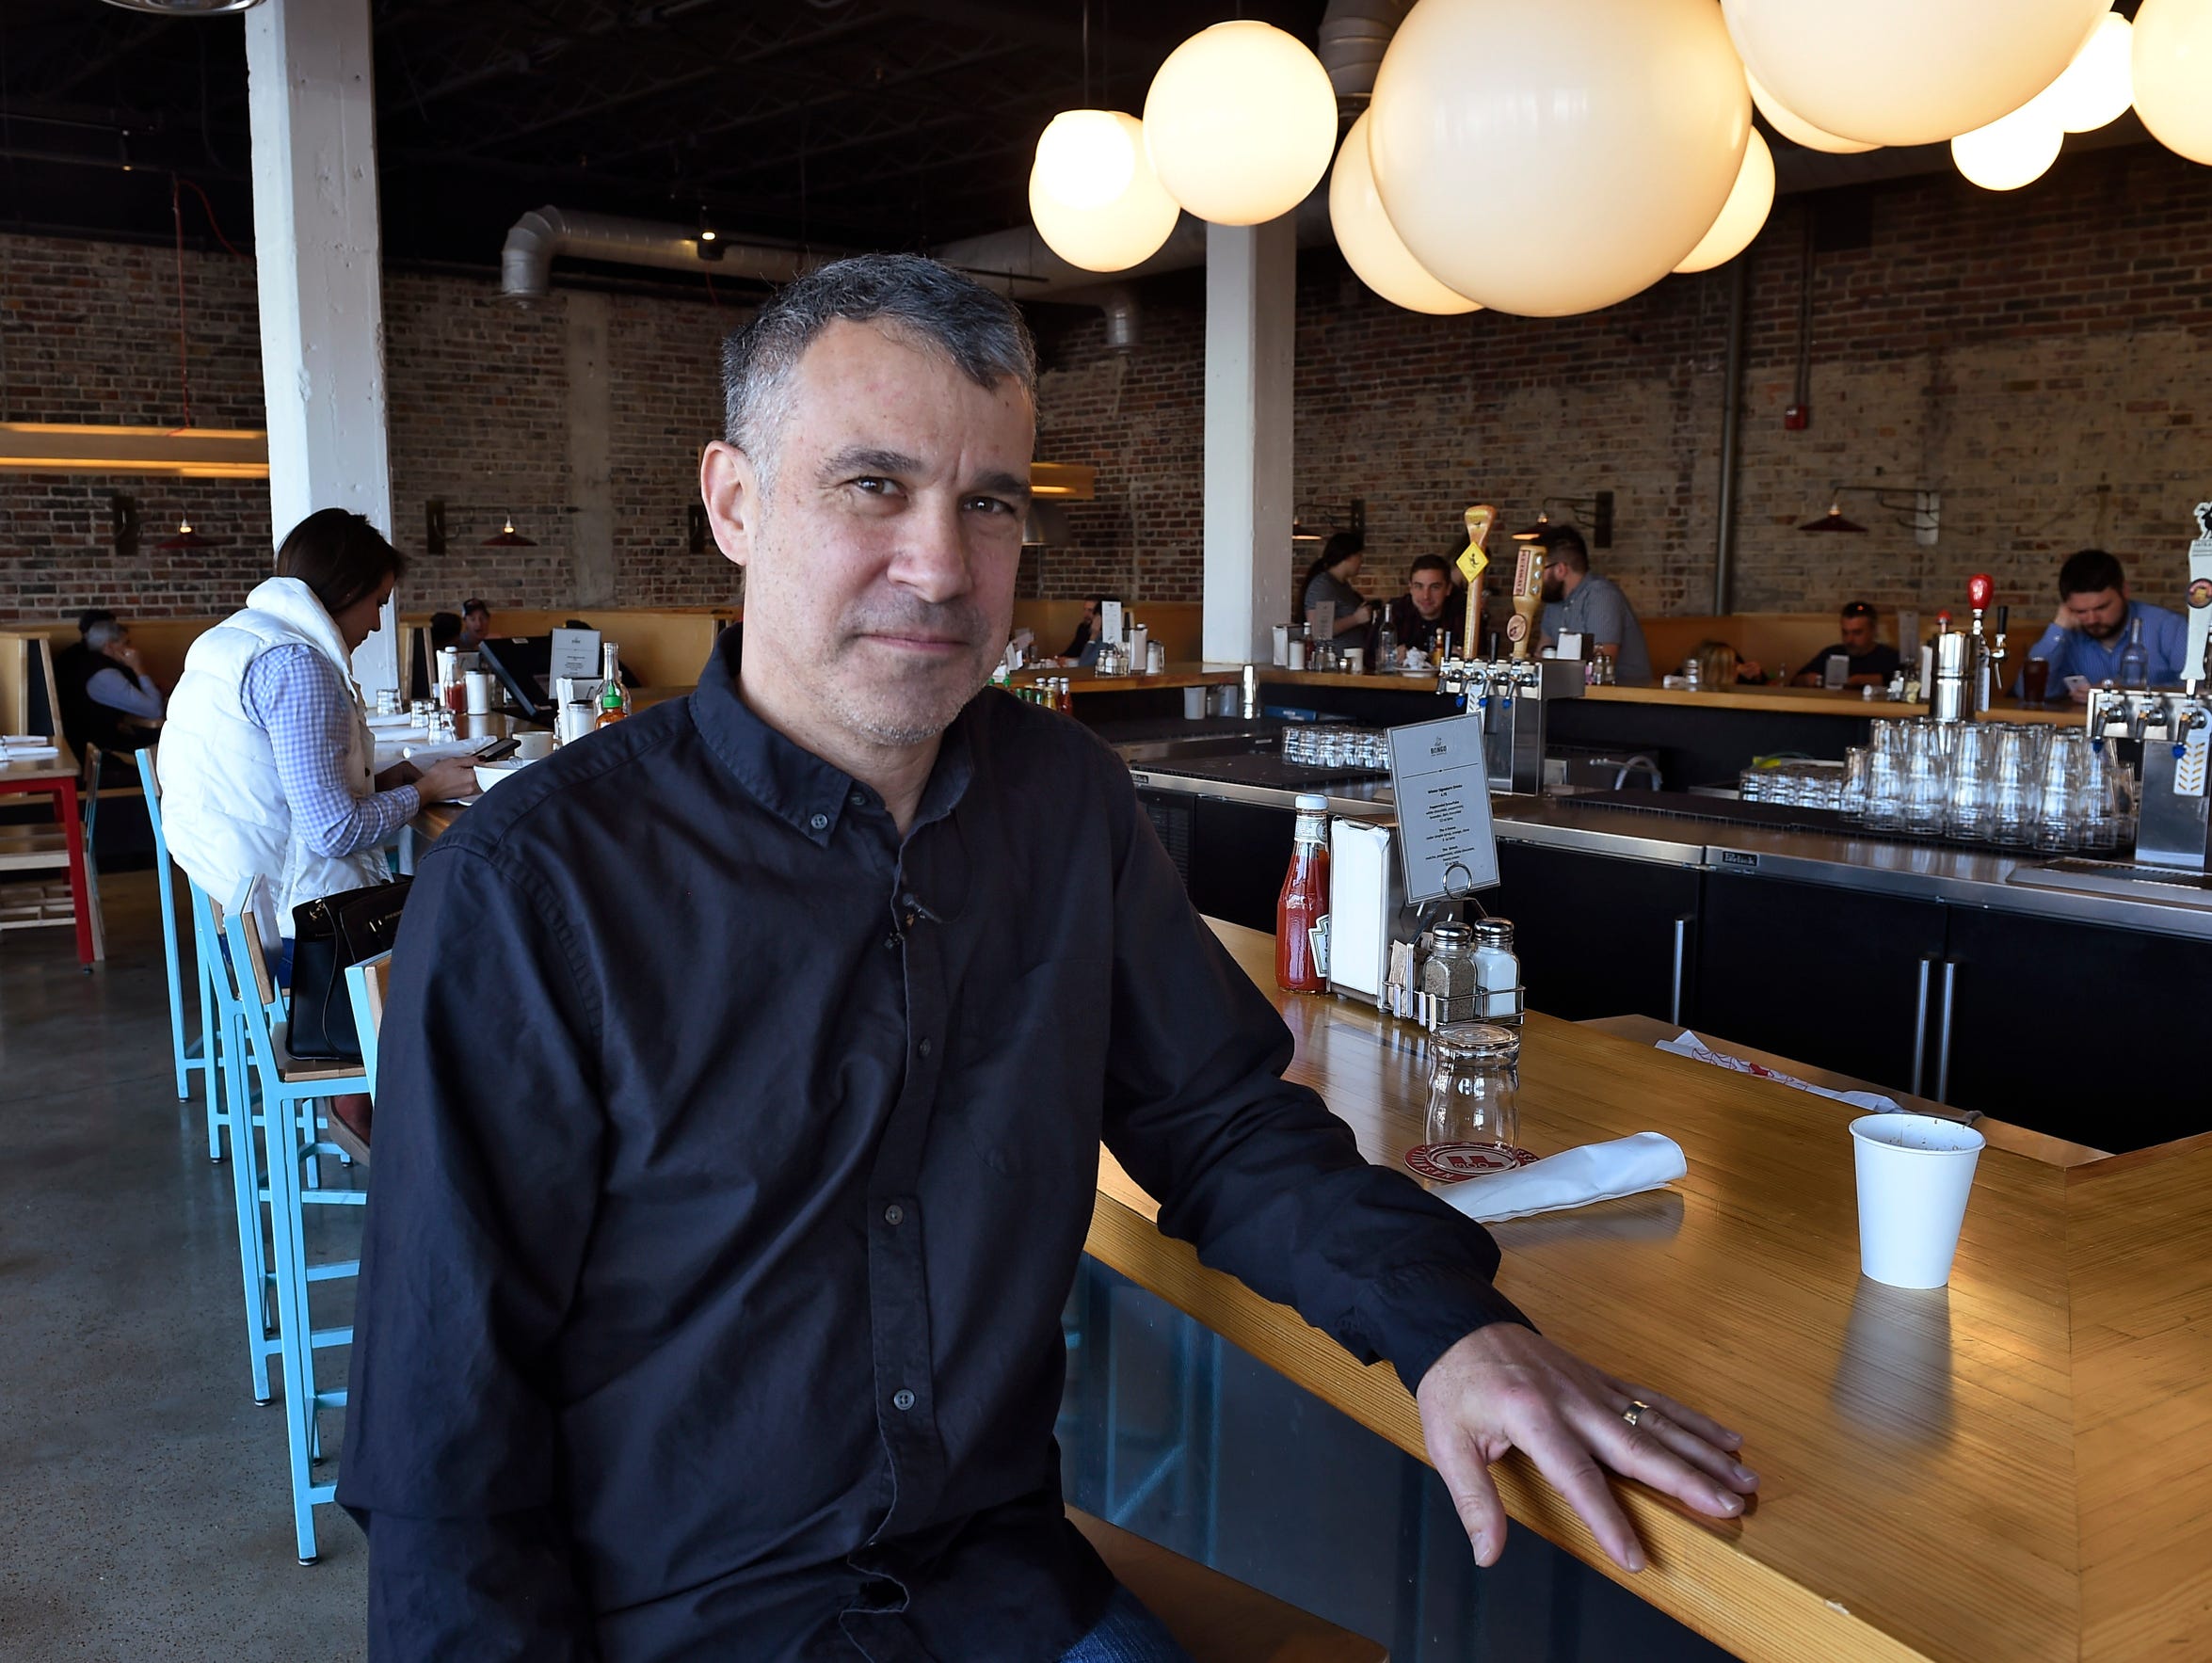 Bob Bernstein is the owner of the restaurant group